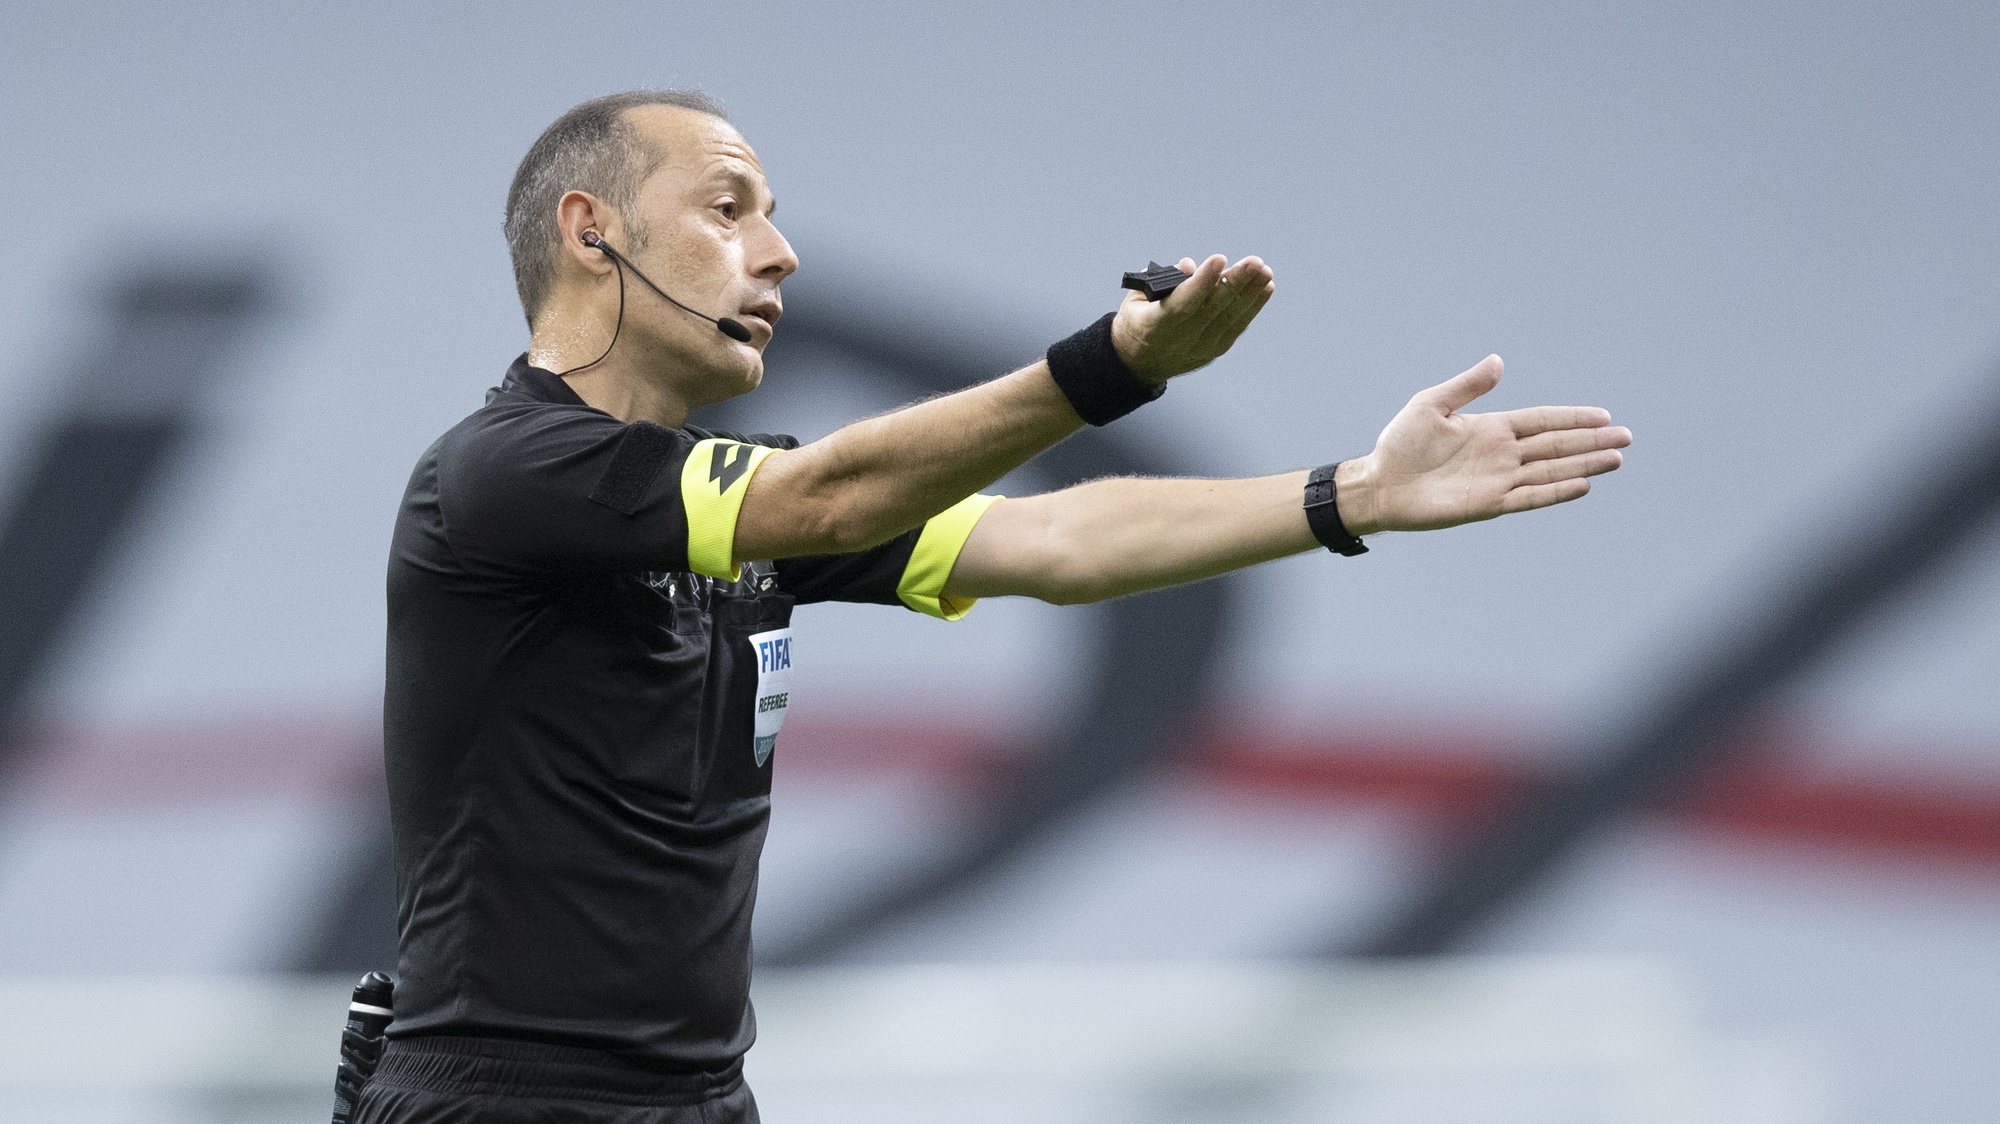 epa08529559 Turkish referee Cuneyt Cakir reacts during the Turkish Super League soccer match between Galatasaray and Trabzonspor in Istanbul, Turkey, 05 July 2020.  EPA/TOLGA BOZOGLU